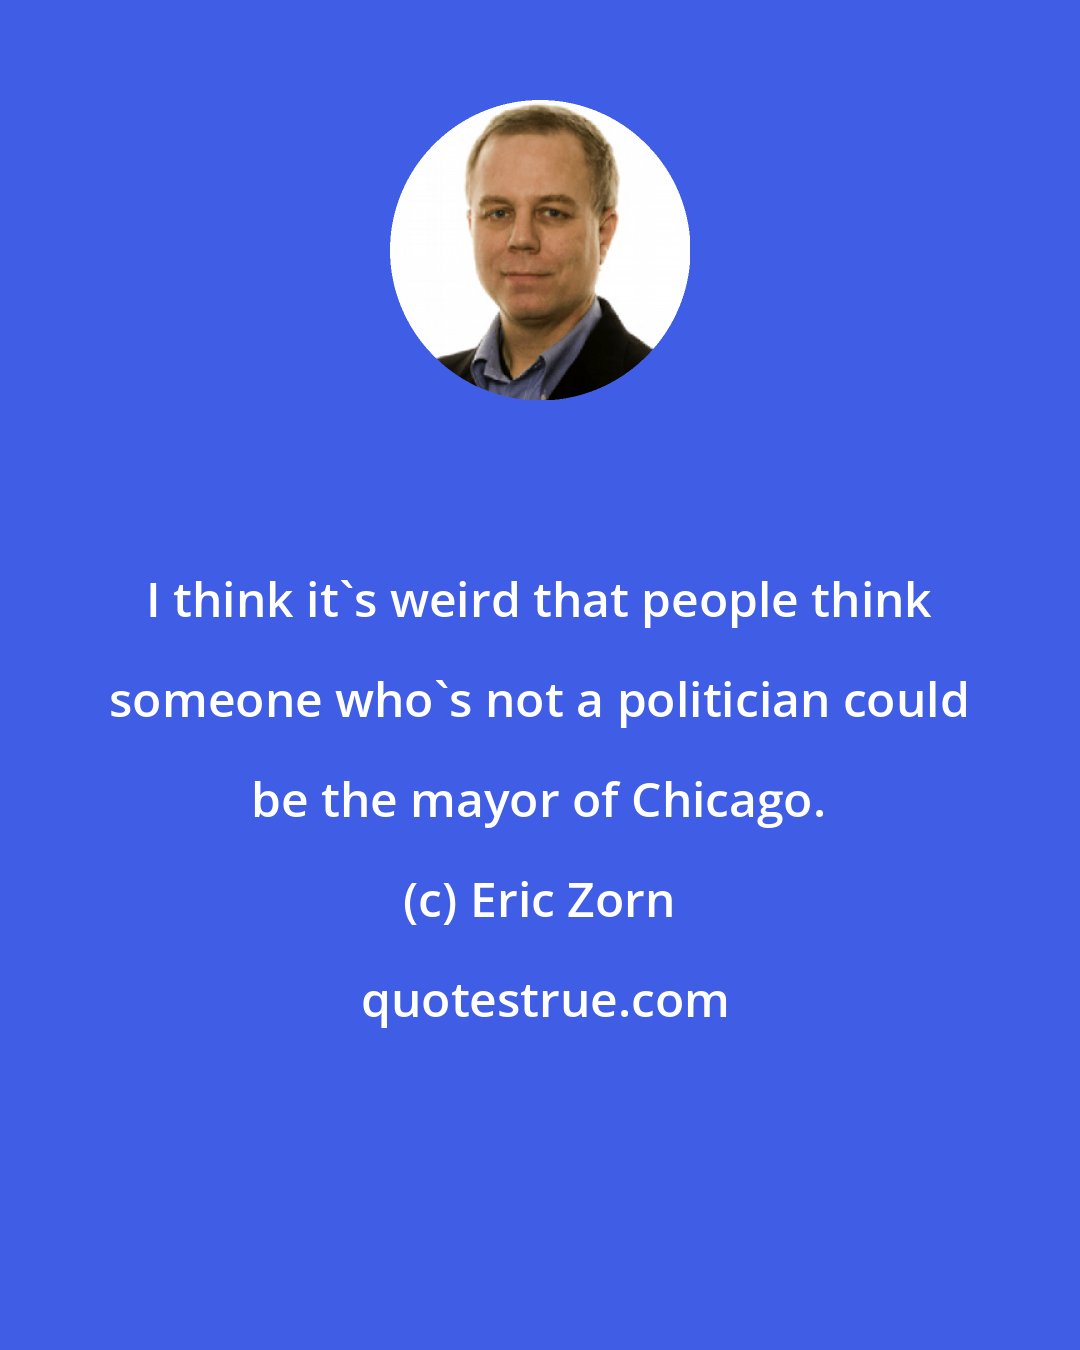 Eric Zorn: I think it's weird that people think someone who's not a politician could be the mayor of Chicago.